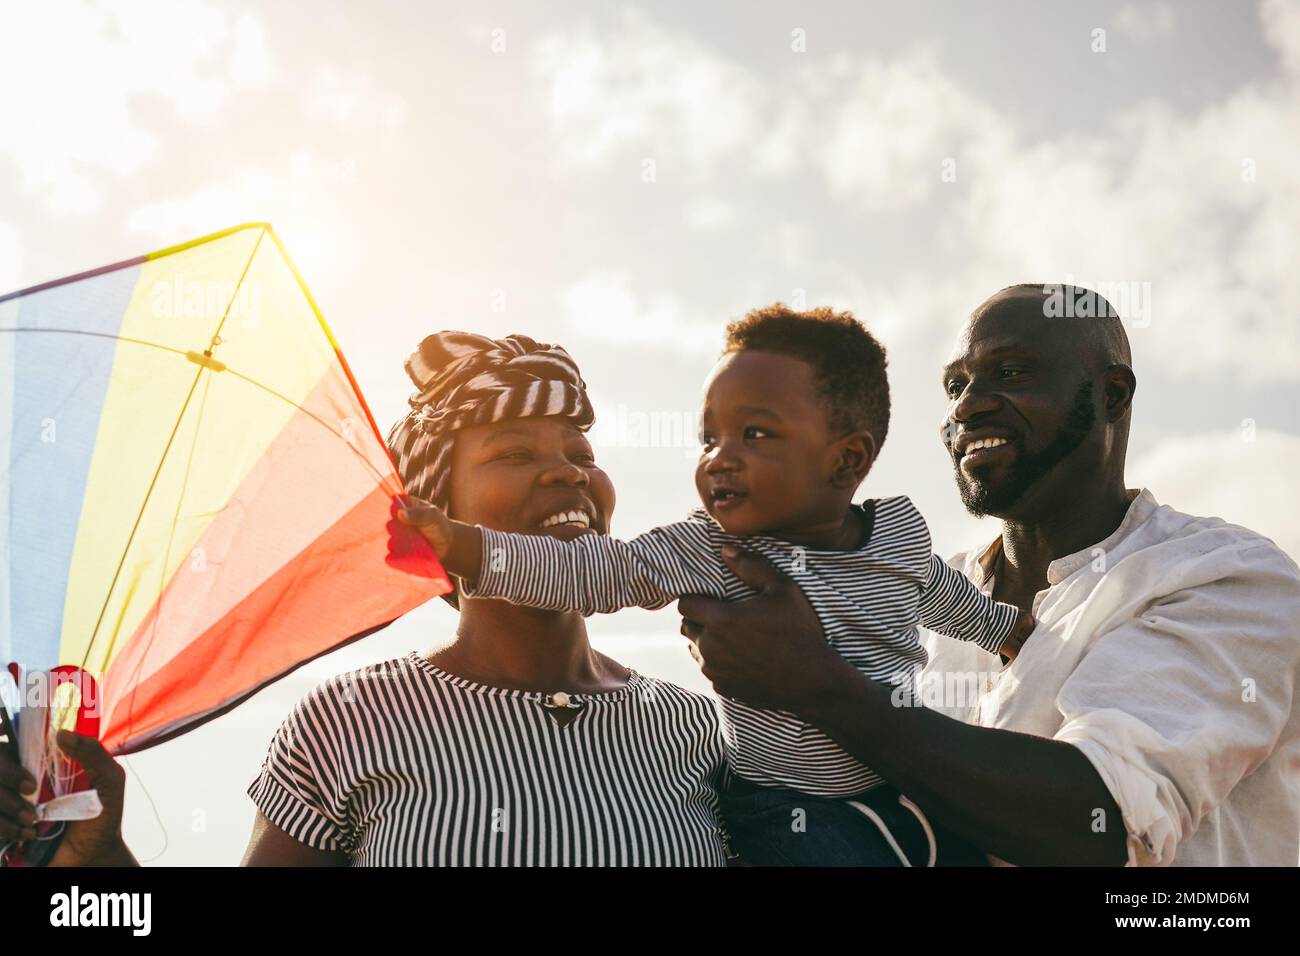 African family having fun with kite on the beach - Focus on father face Stock Photo